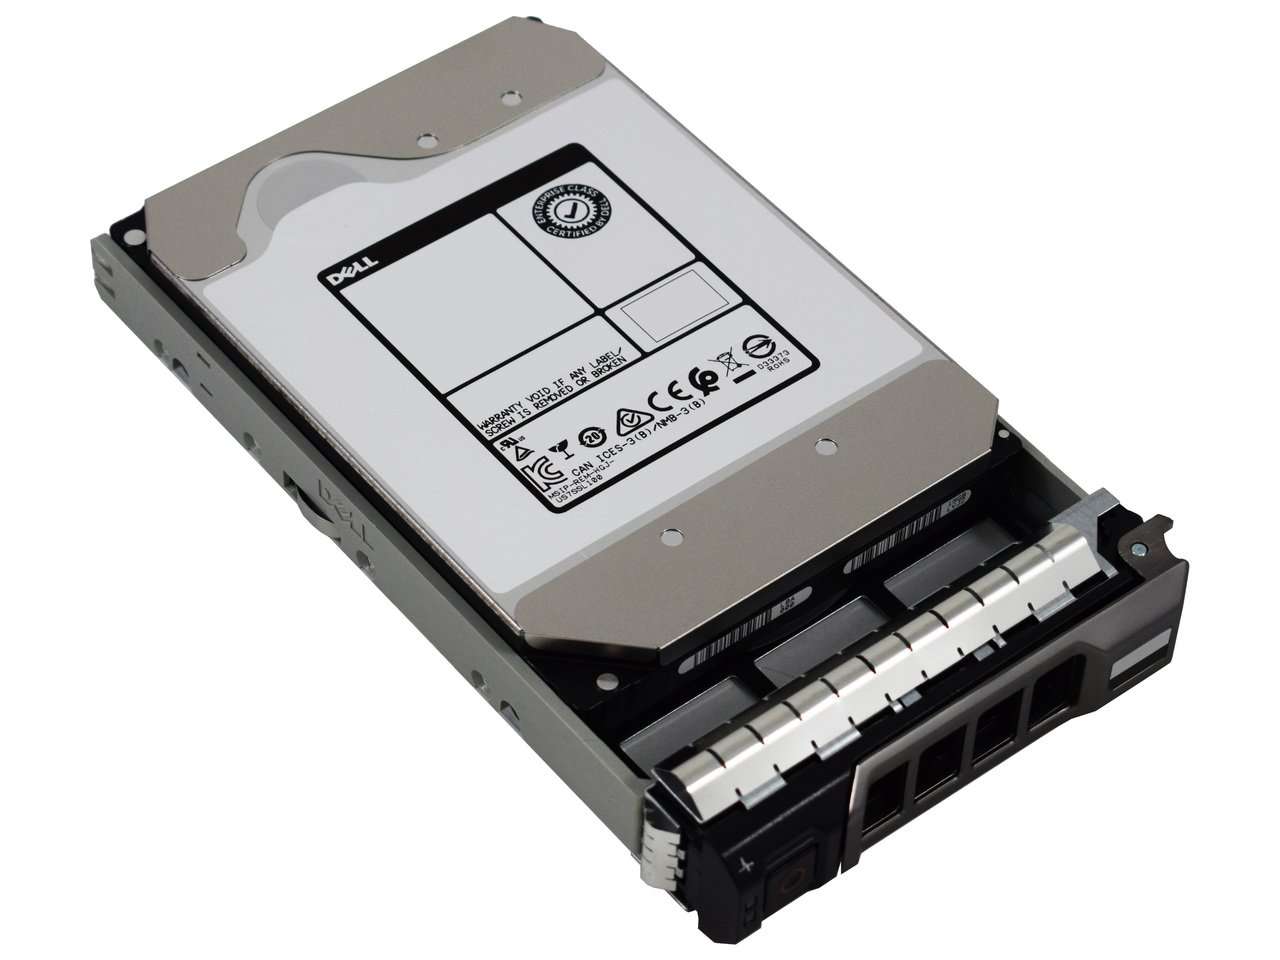 Dell G13 NTF0R 6TB 7.2K RPM SAS 6Gb/s 512e 3.5" NearLine Manufacturer Recertified HDD